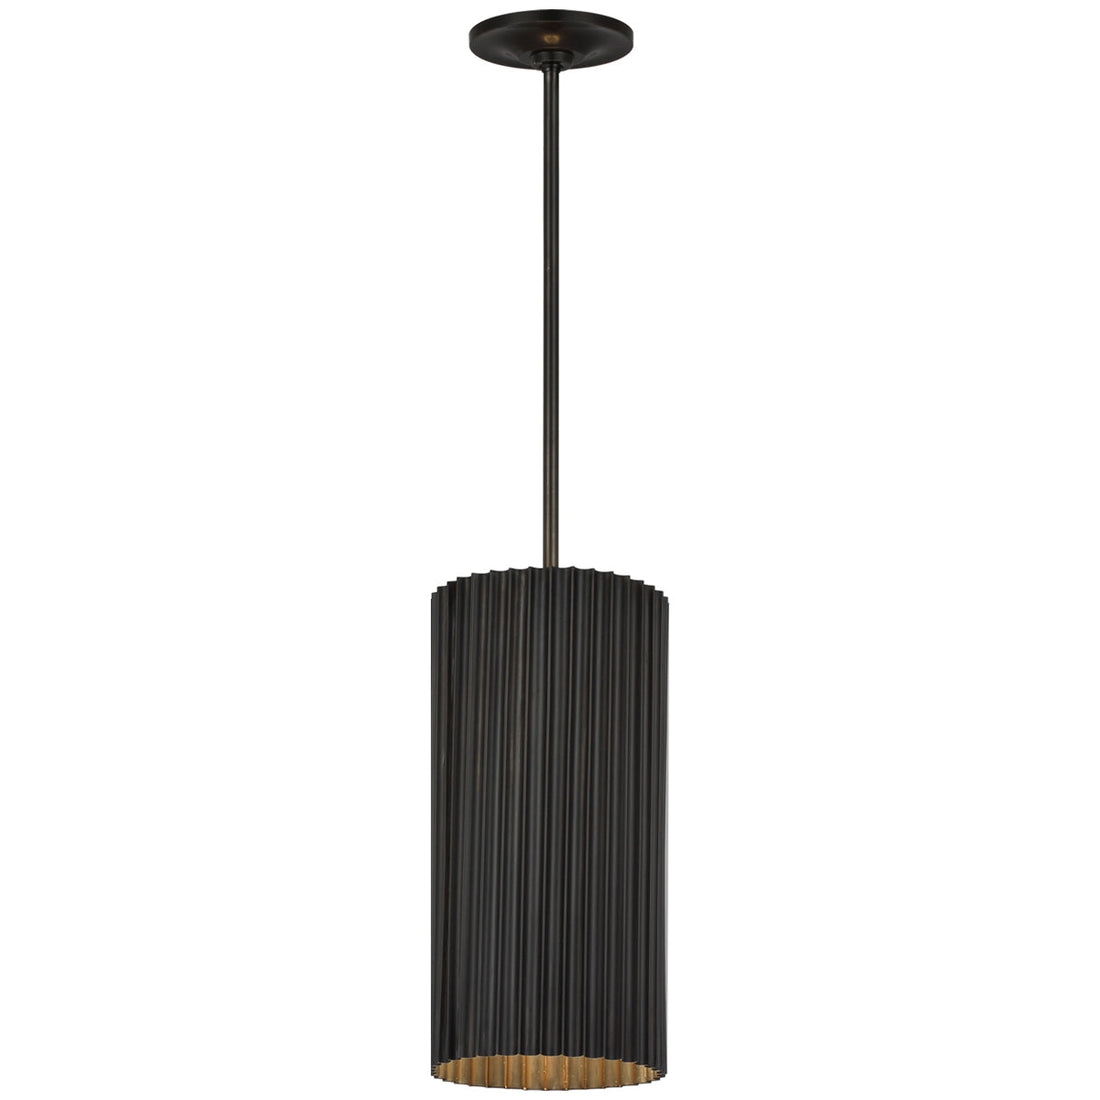 Visual Comfort Rivers Small Fluted Pendant